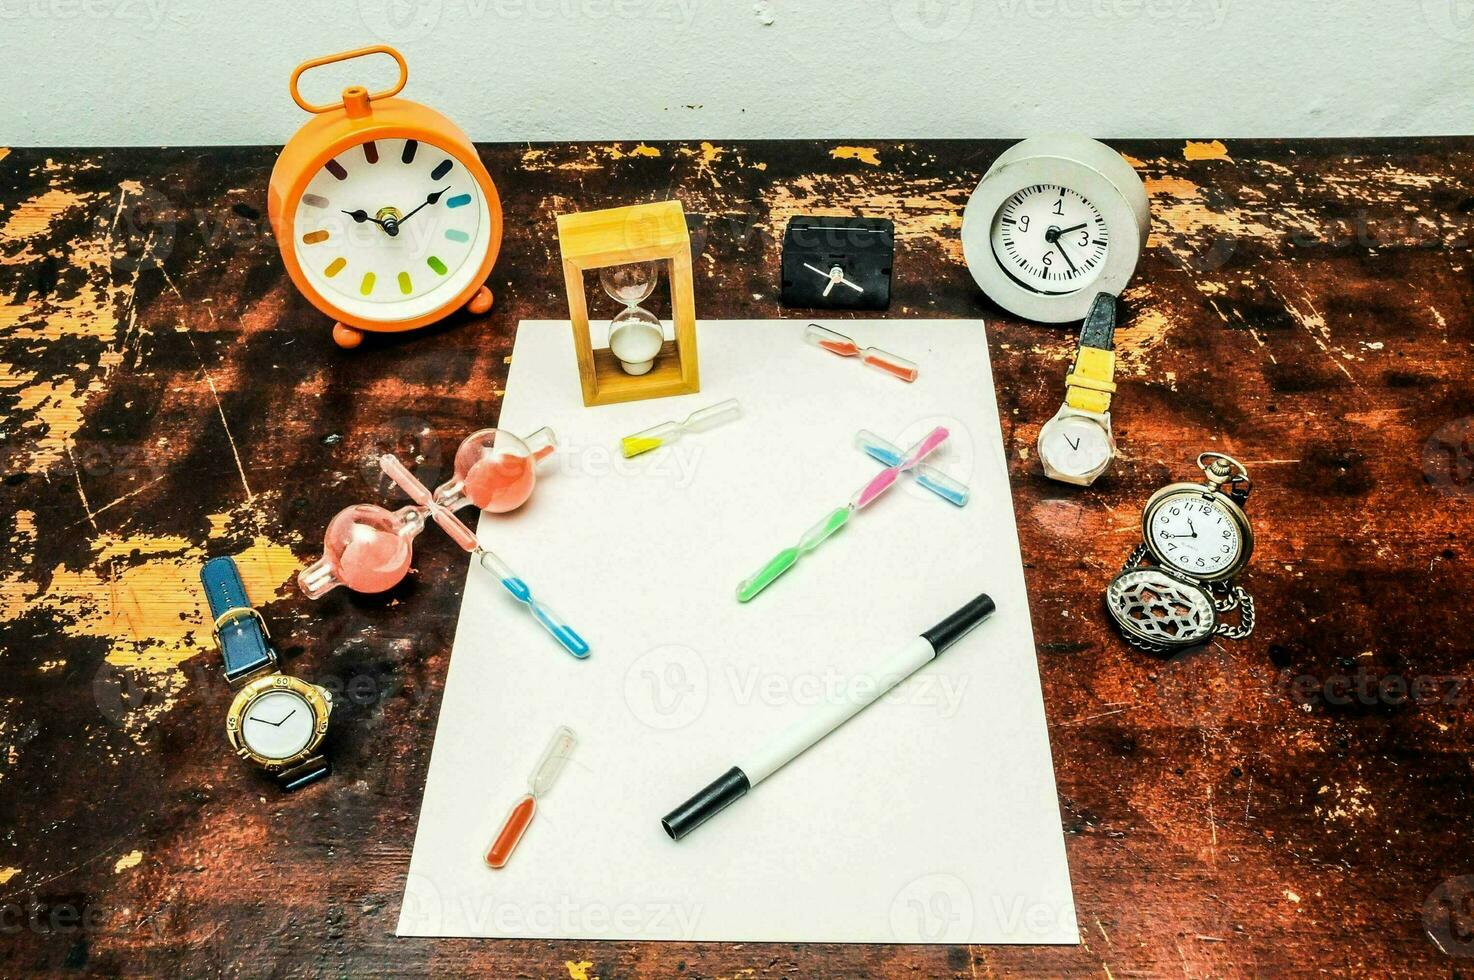 a table with various items including clocks, pens, and a pen photo